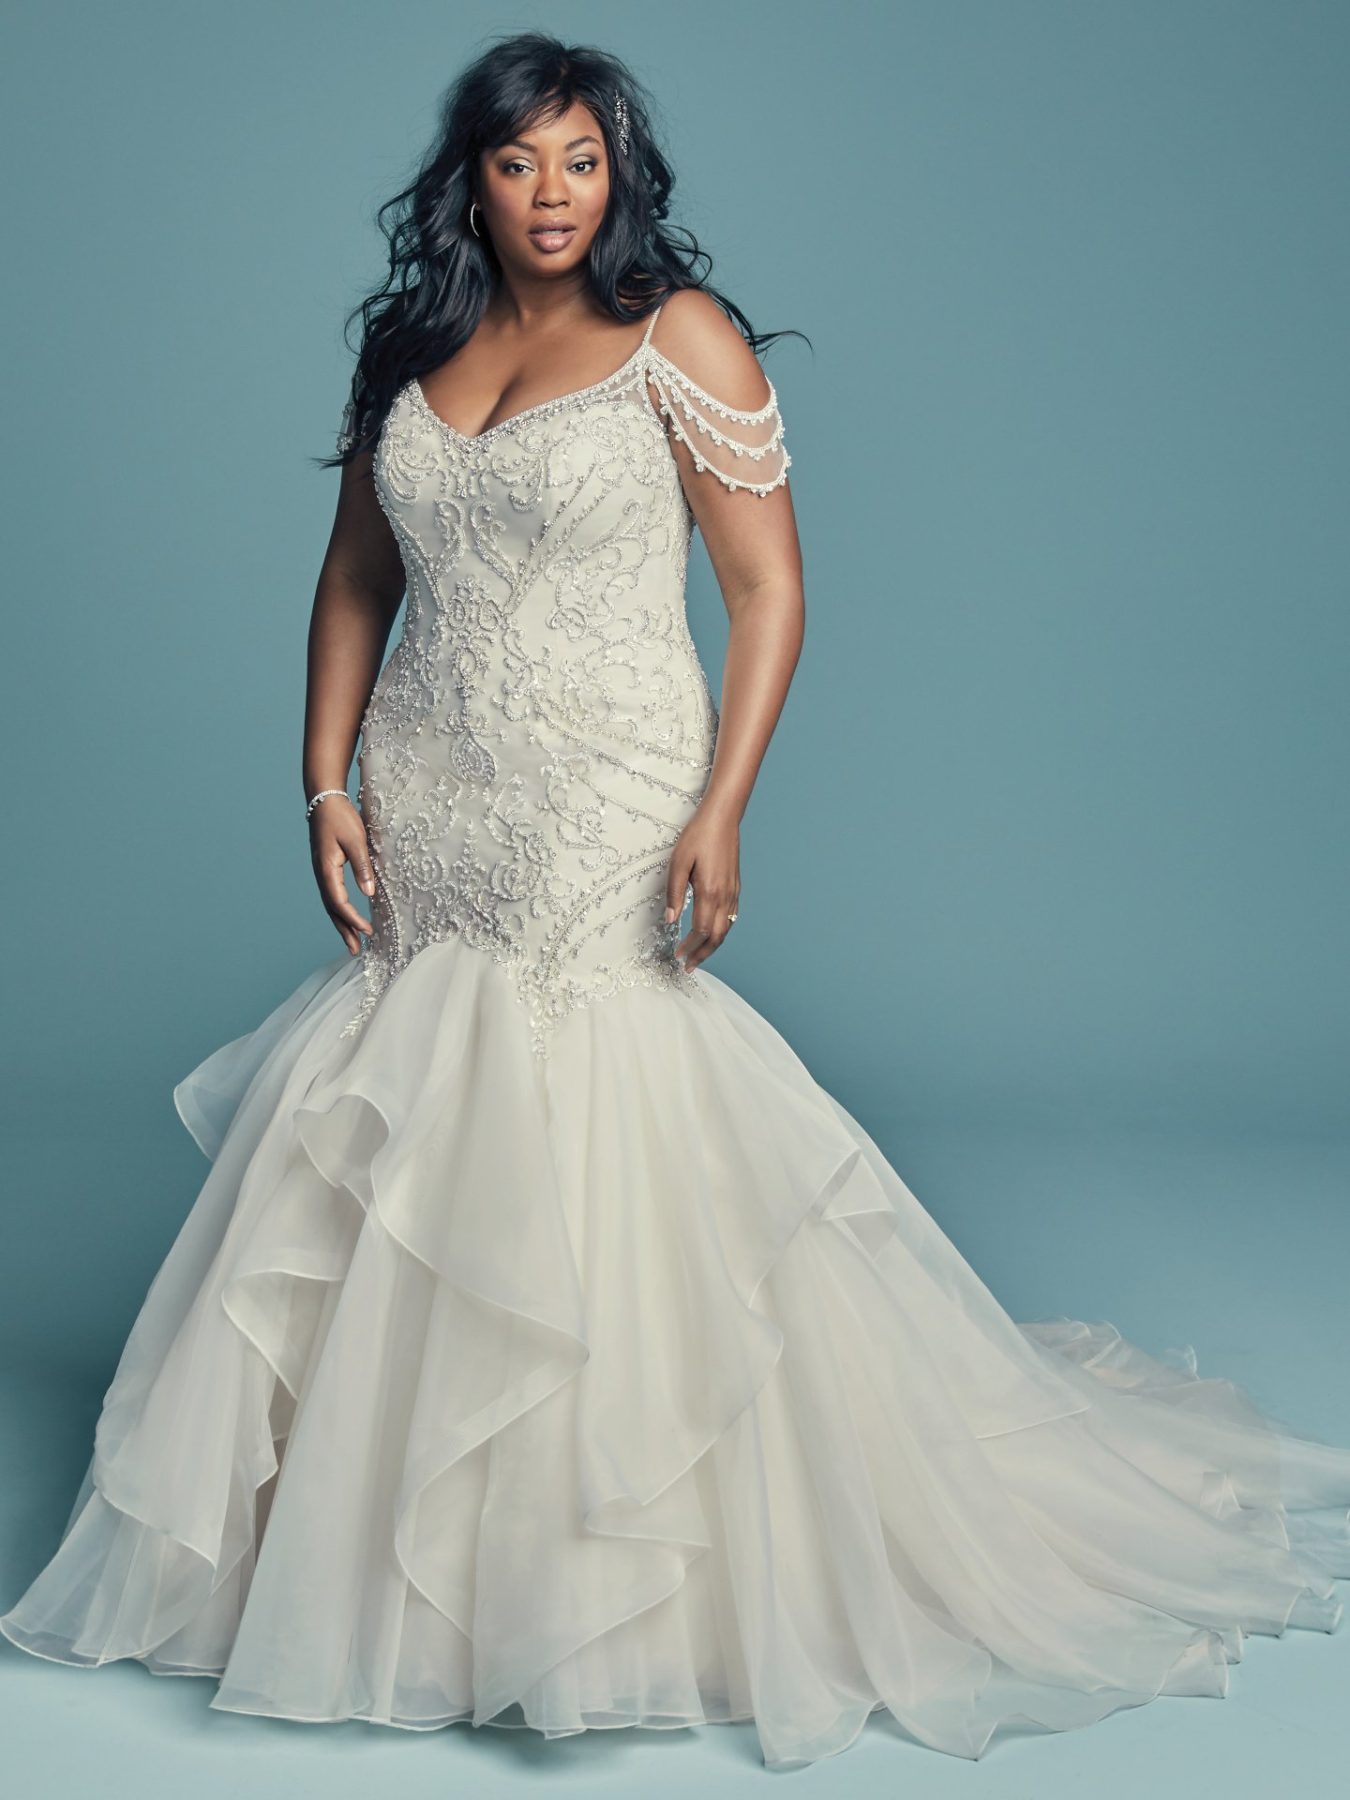 33 Gorgeous Plus Size Wedding Dresses For Every Style And Budget A Practical Wedding 0308